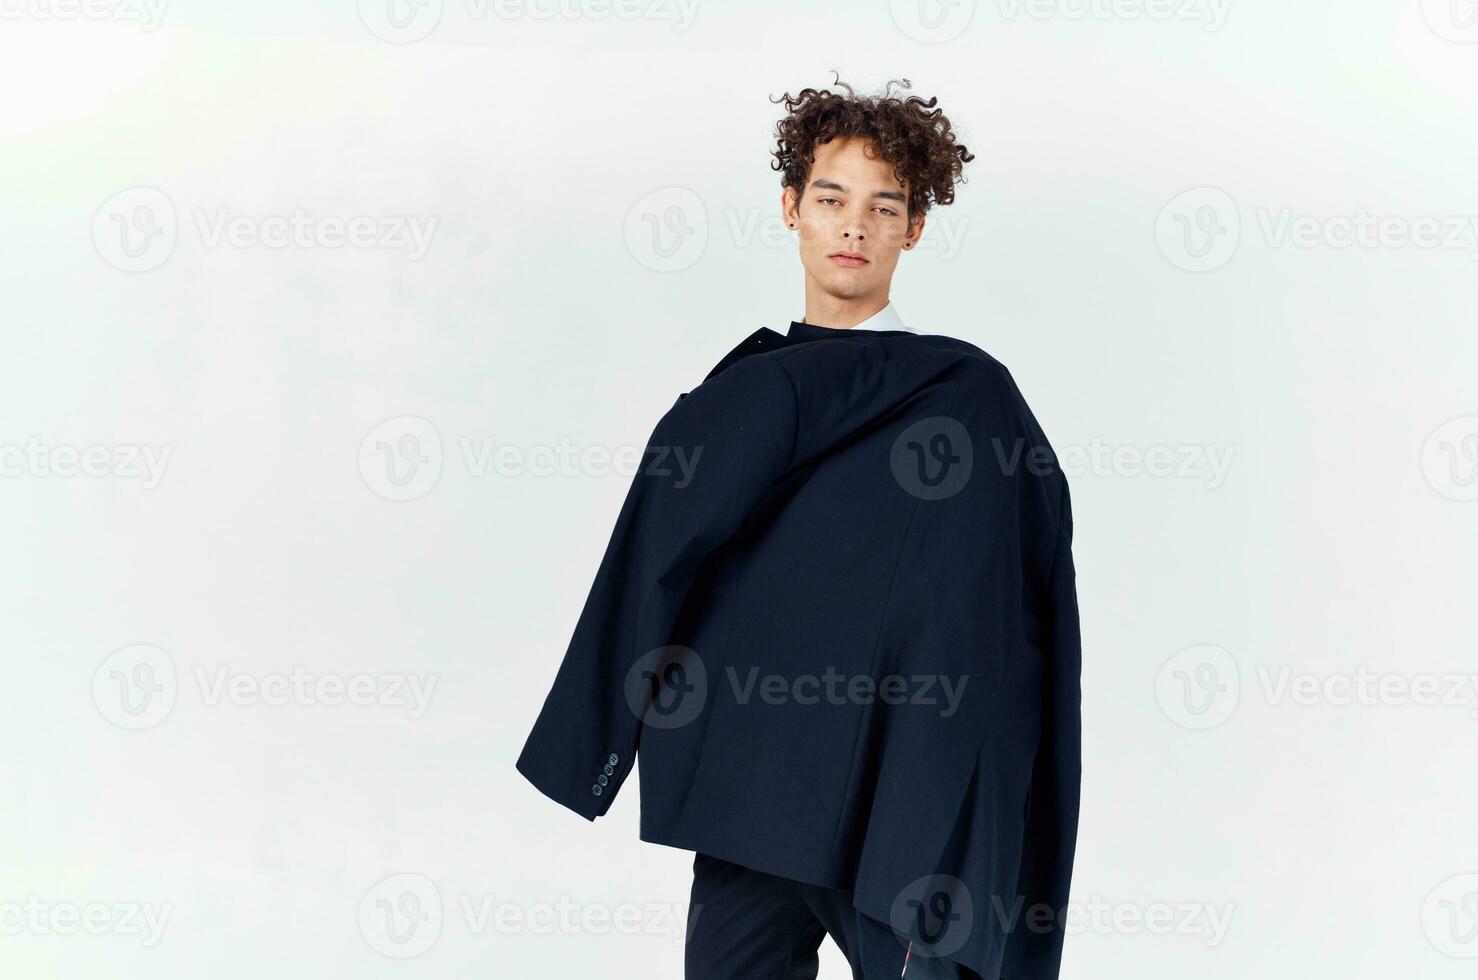 man holding a black jacket in his hands fashion modern style self-confidence studio photo